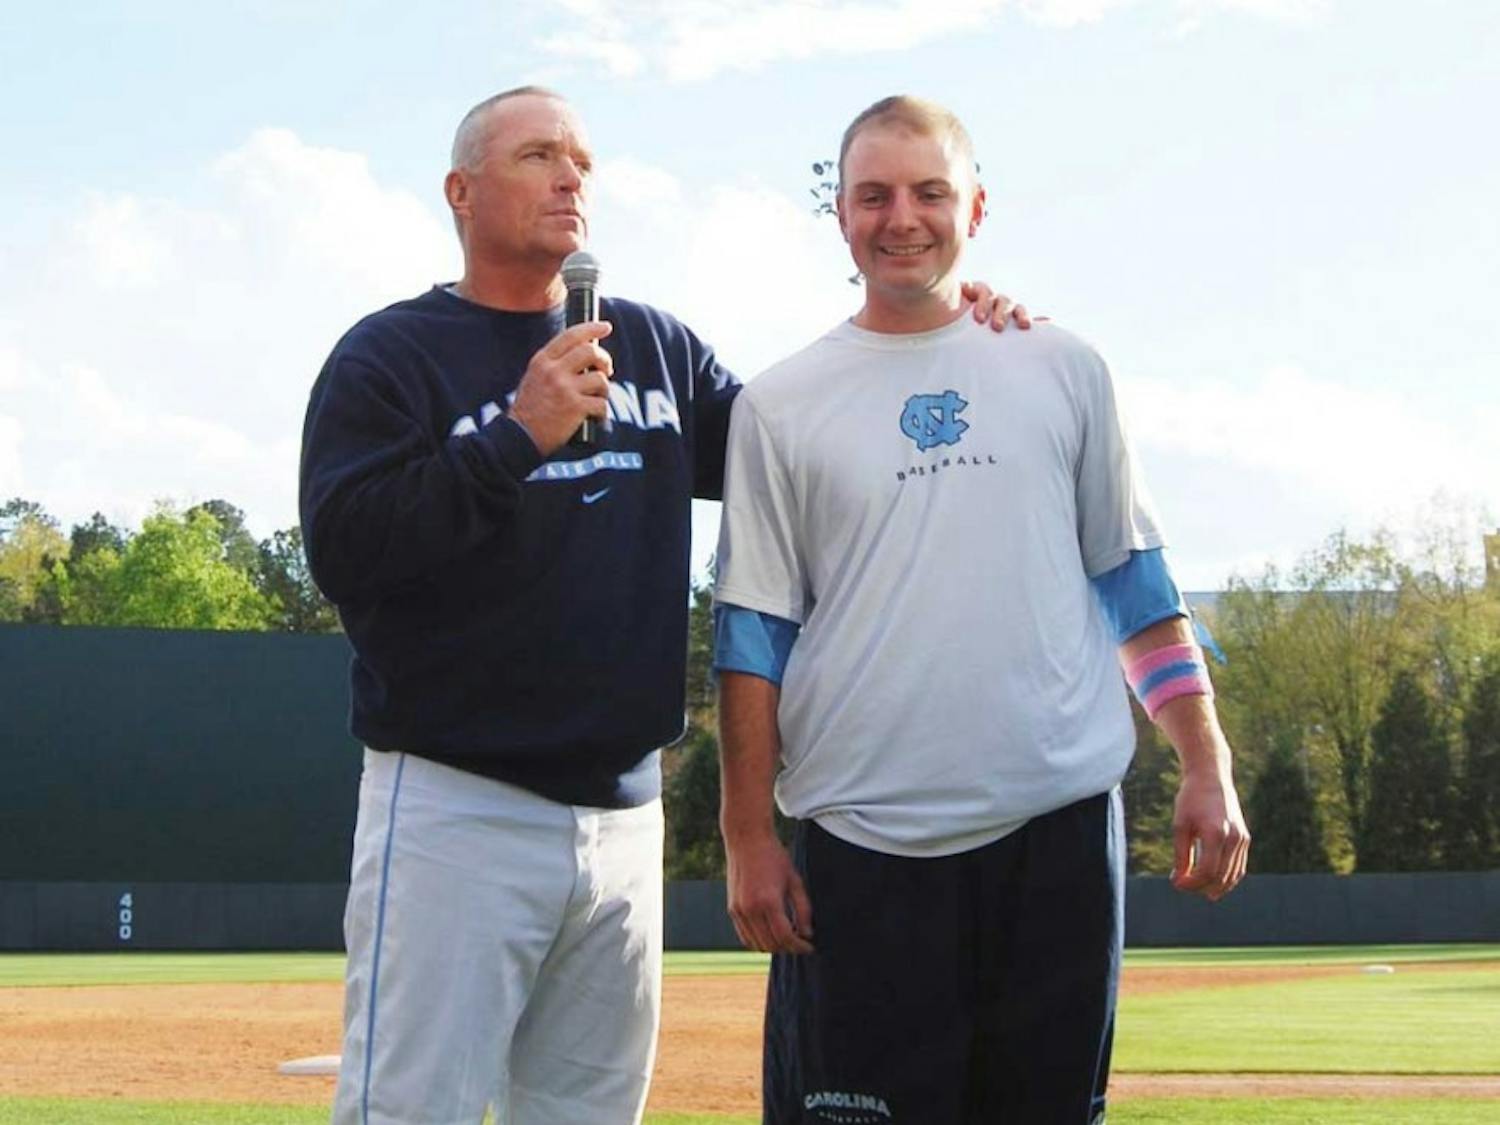 Head coach Mike Fox tells how he first met bullpen catcher Chase Jones at BaseBald for the Cure. "He was the finest player that never played for me," he said. 